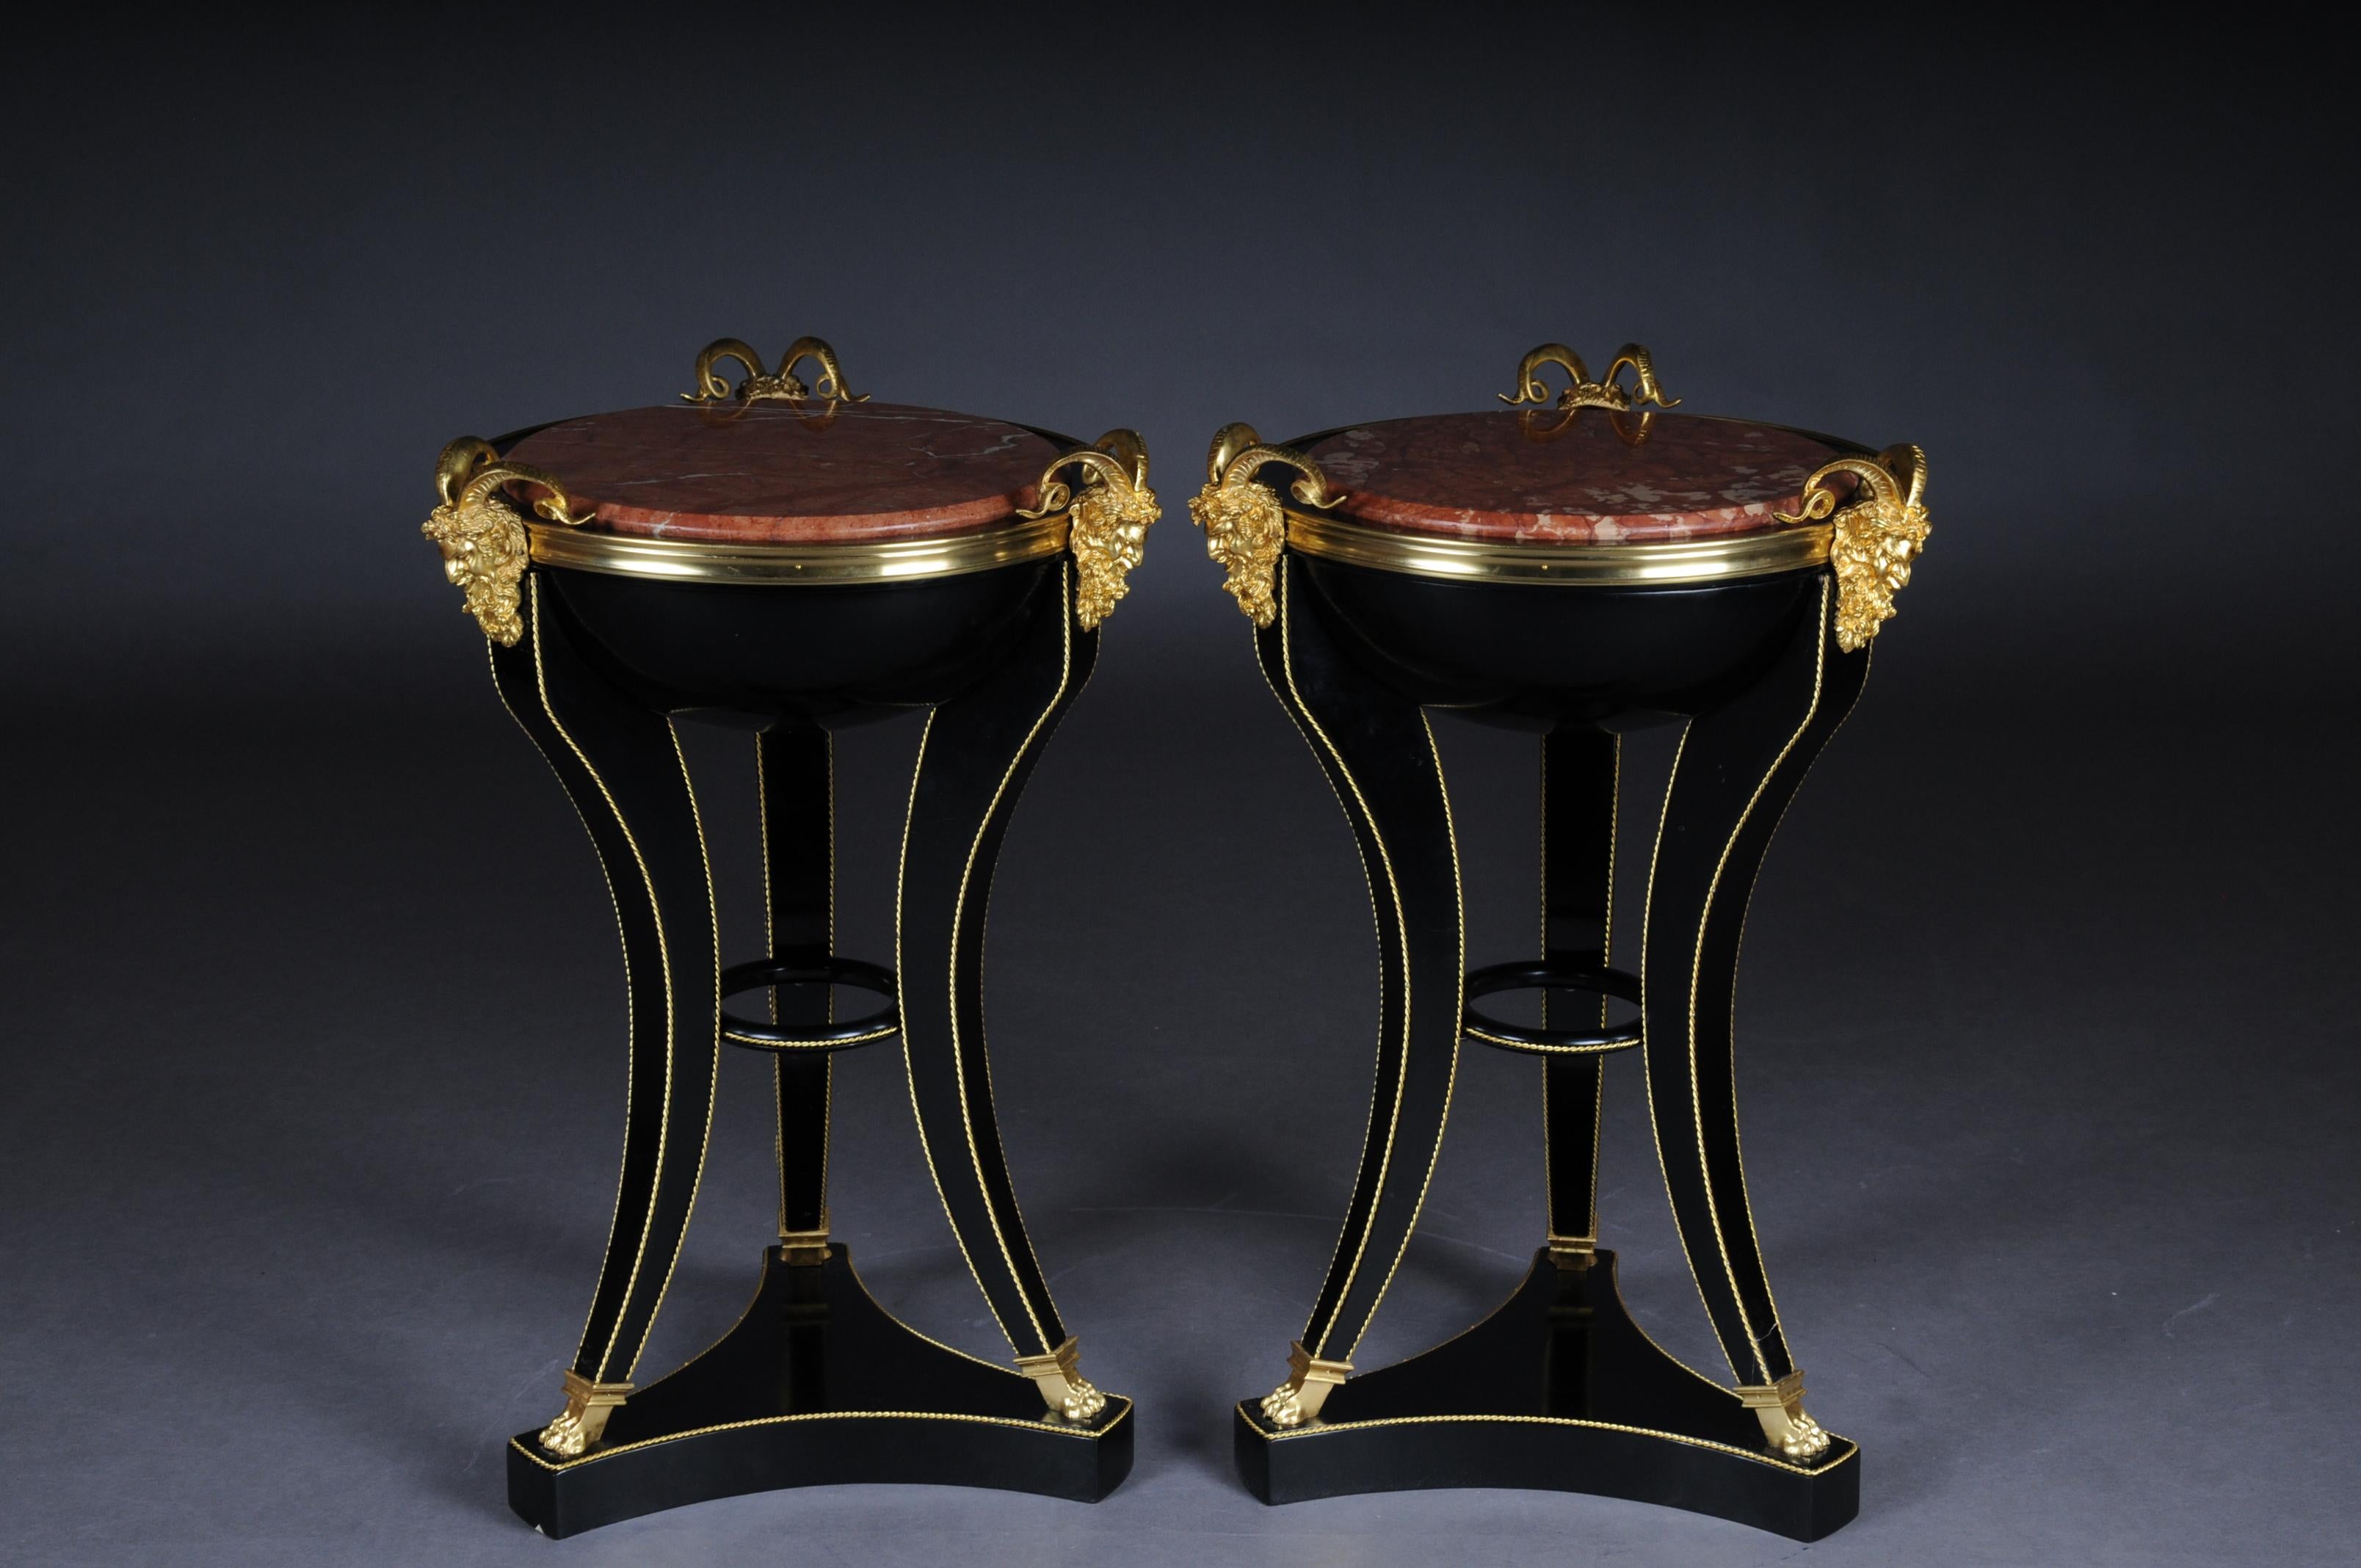 French Unique Ebonized Side Table or Pillar in the Empire Style